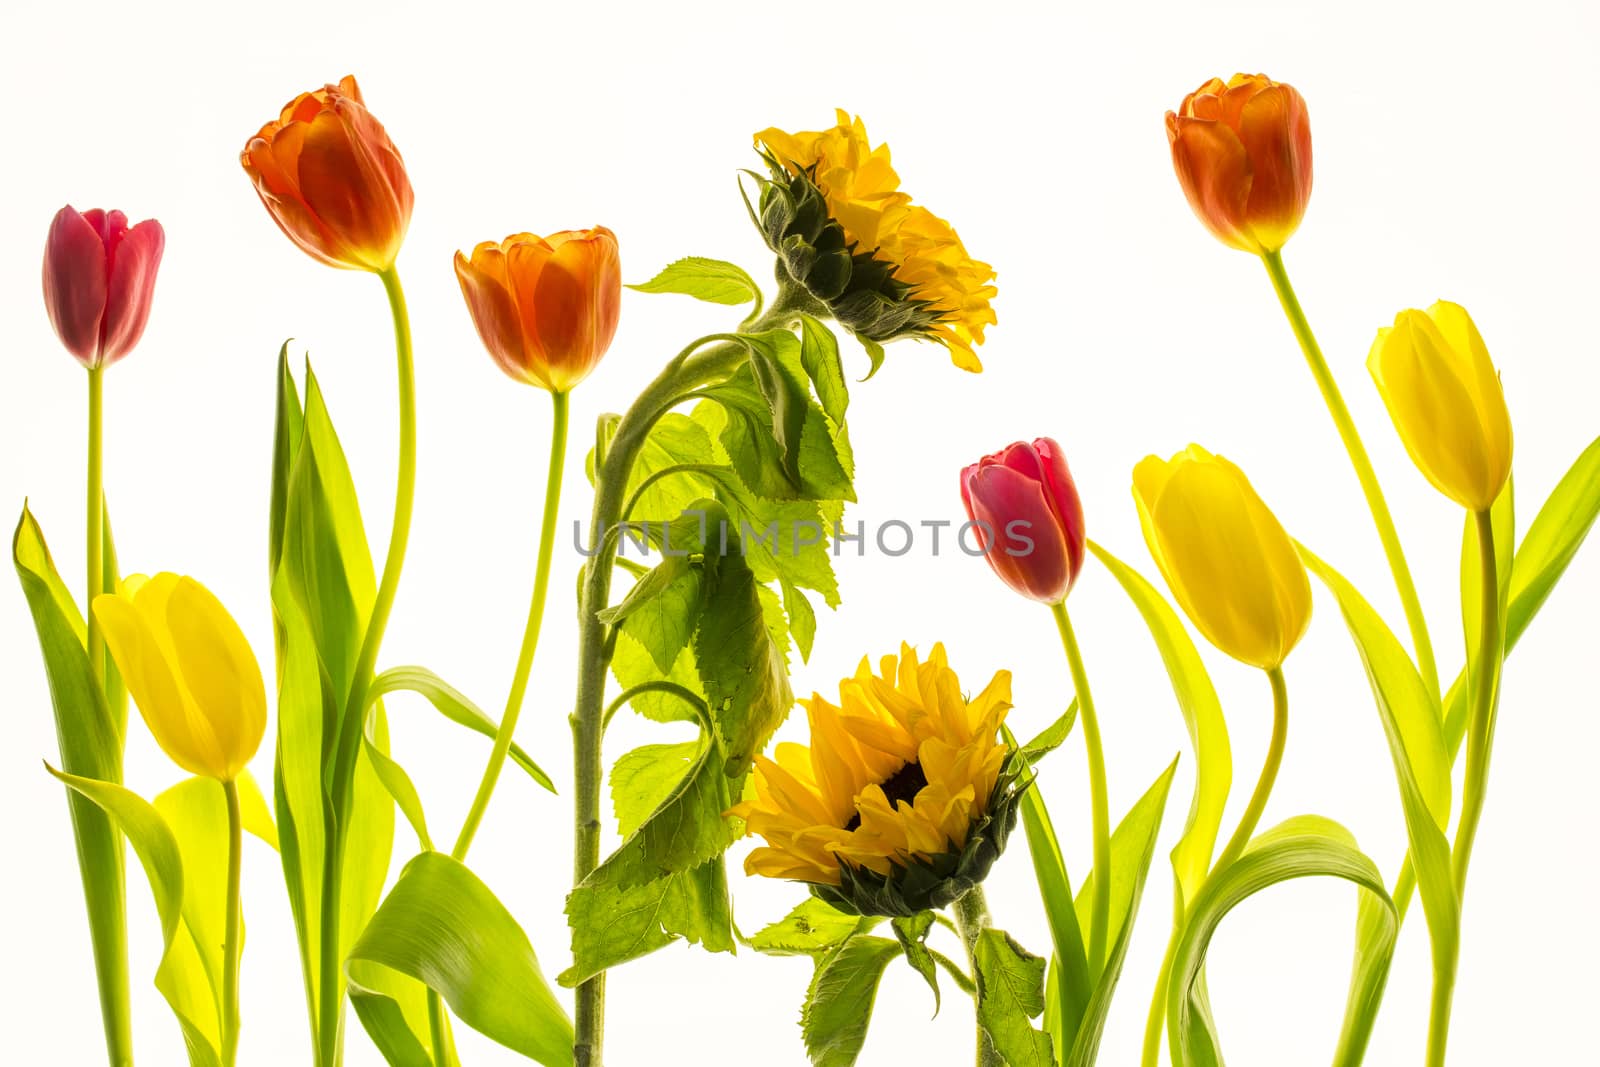 tulips and sunflowers isolated on a white background by sashokddt